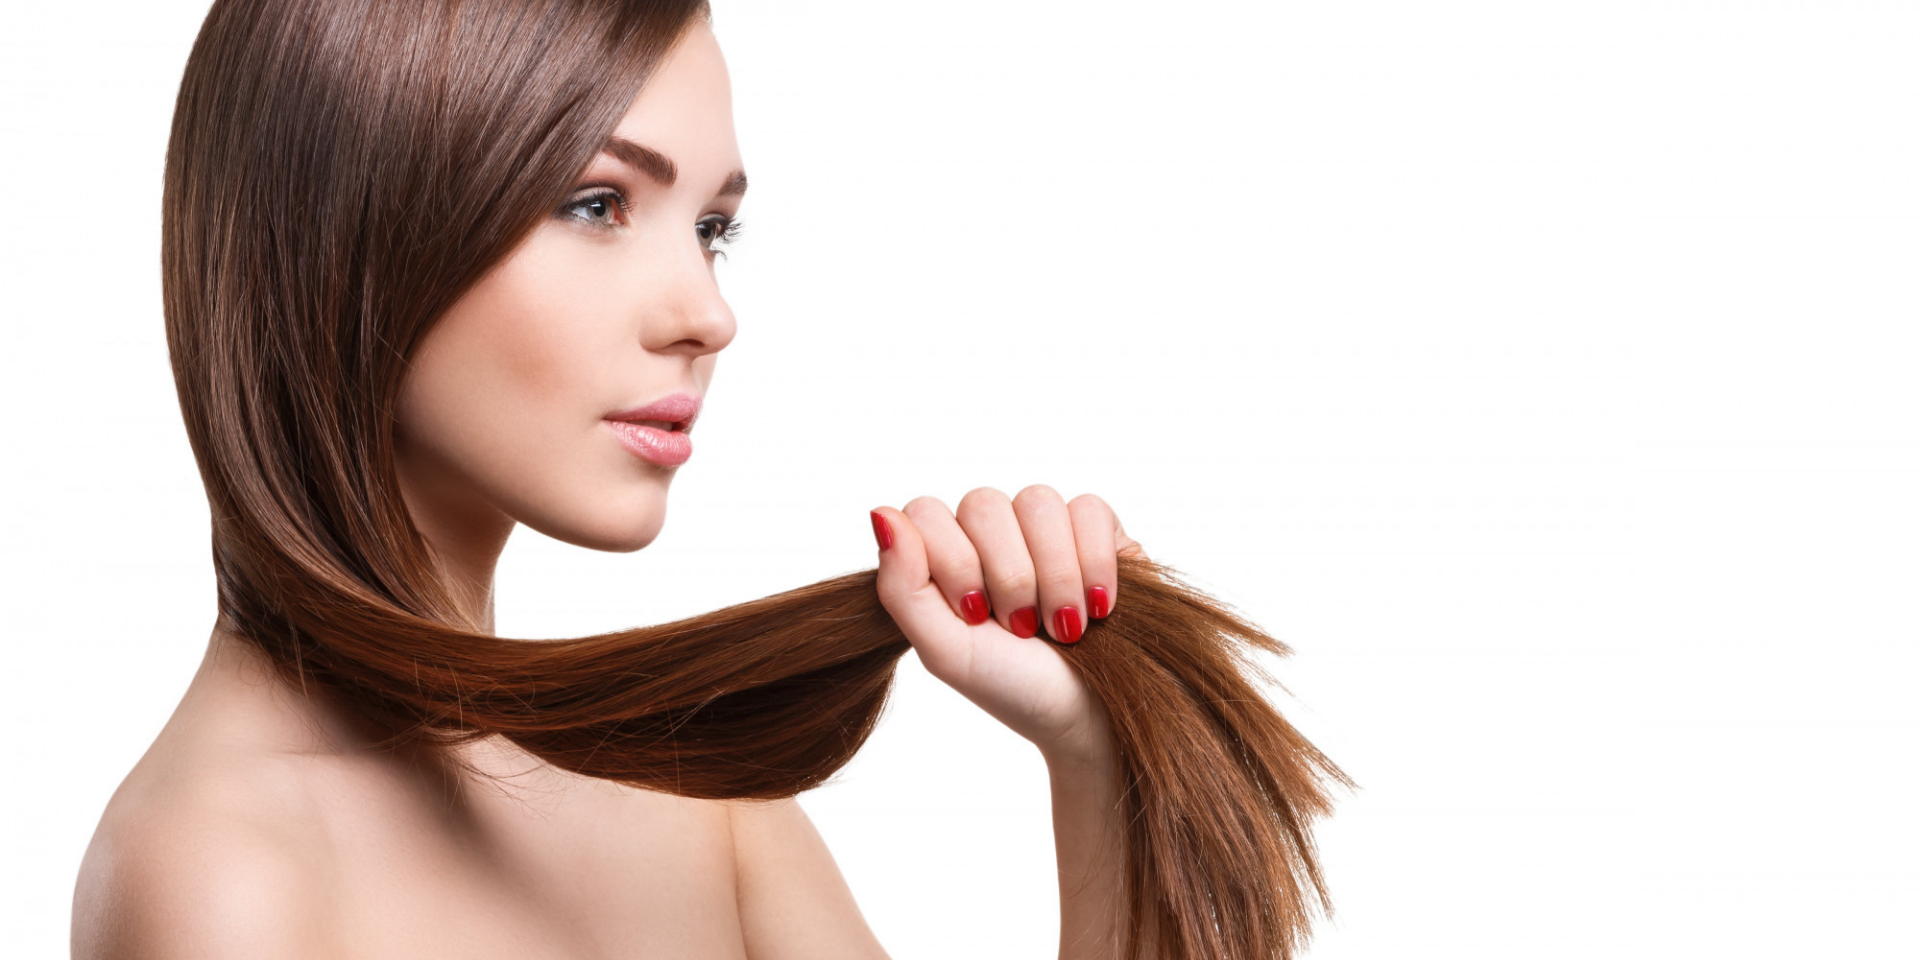 The role of keratin for healthier hair